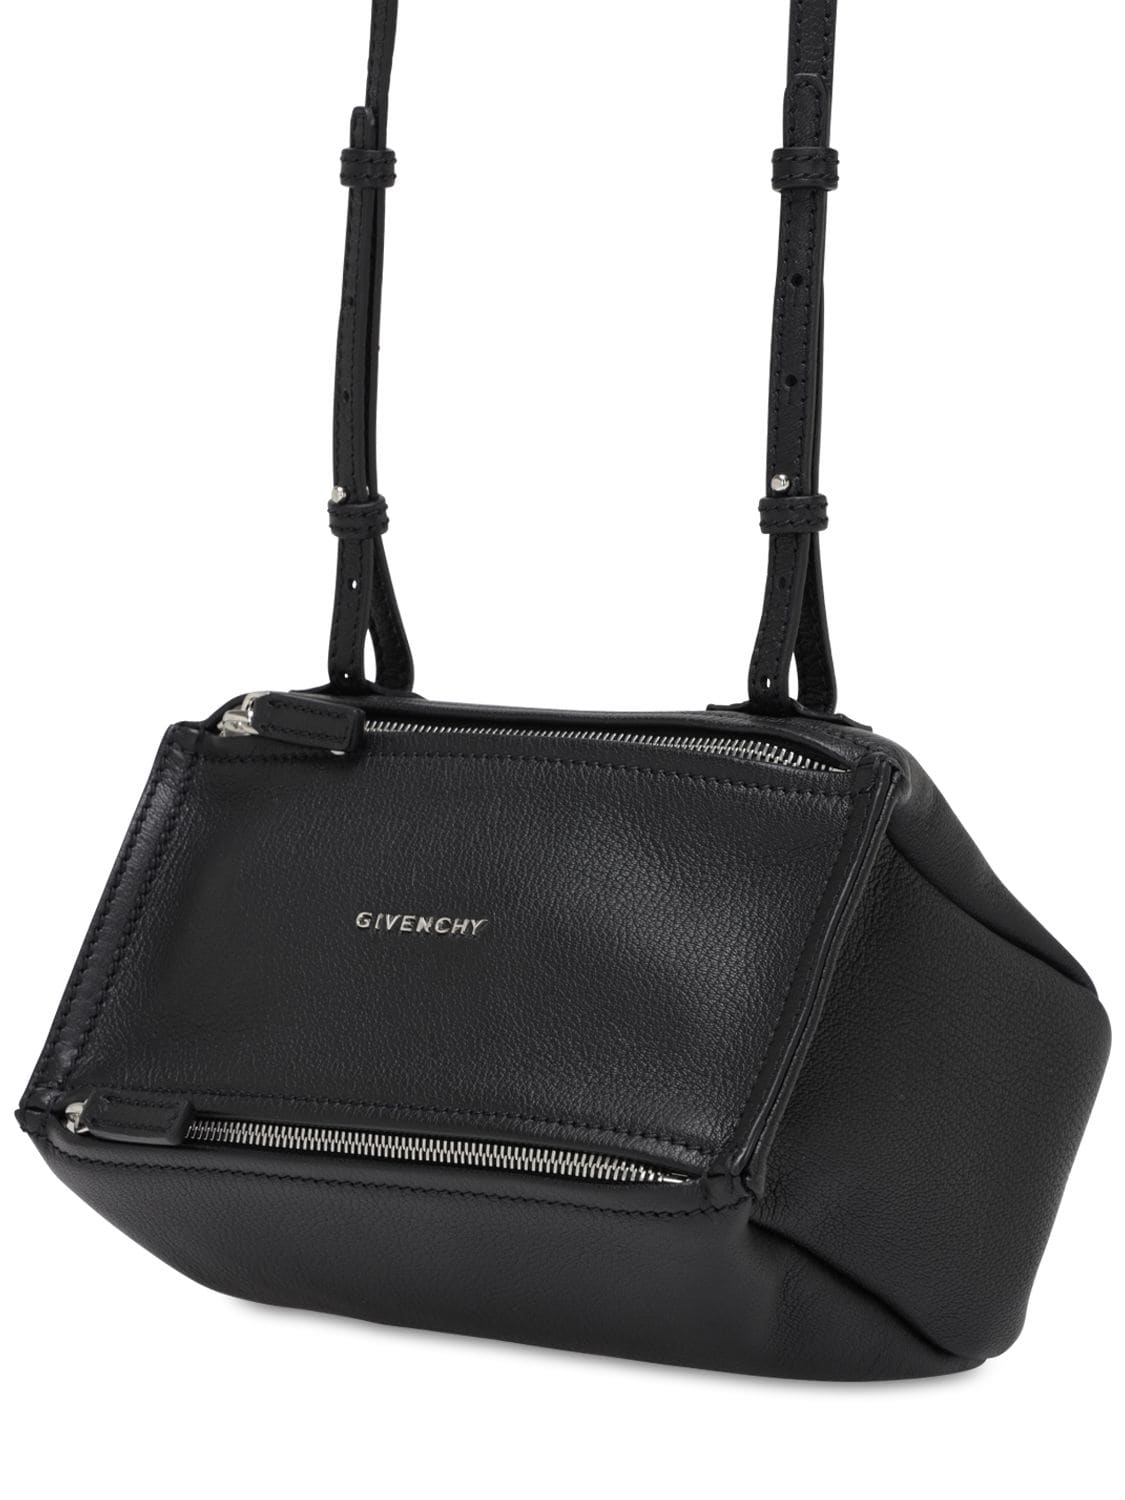 Givenchy Pandora Mini Grained Leather Bag In Black